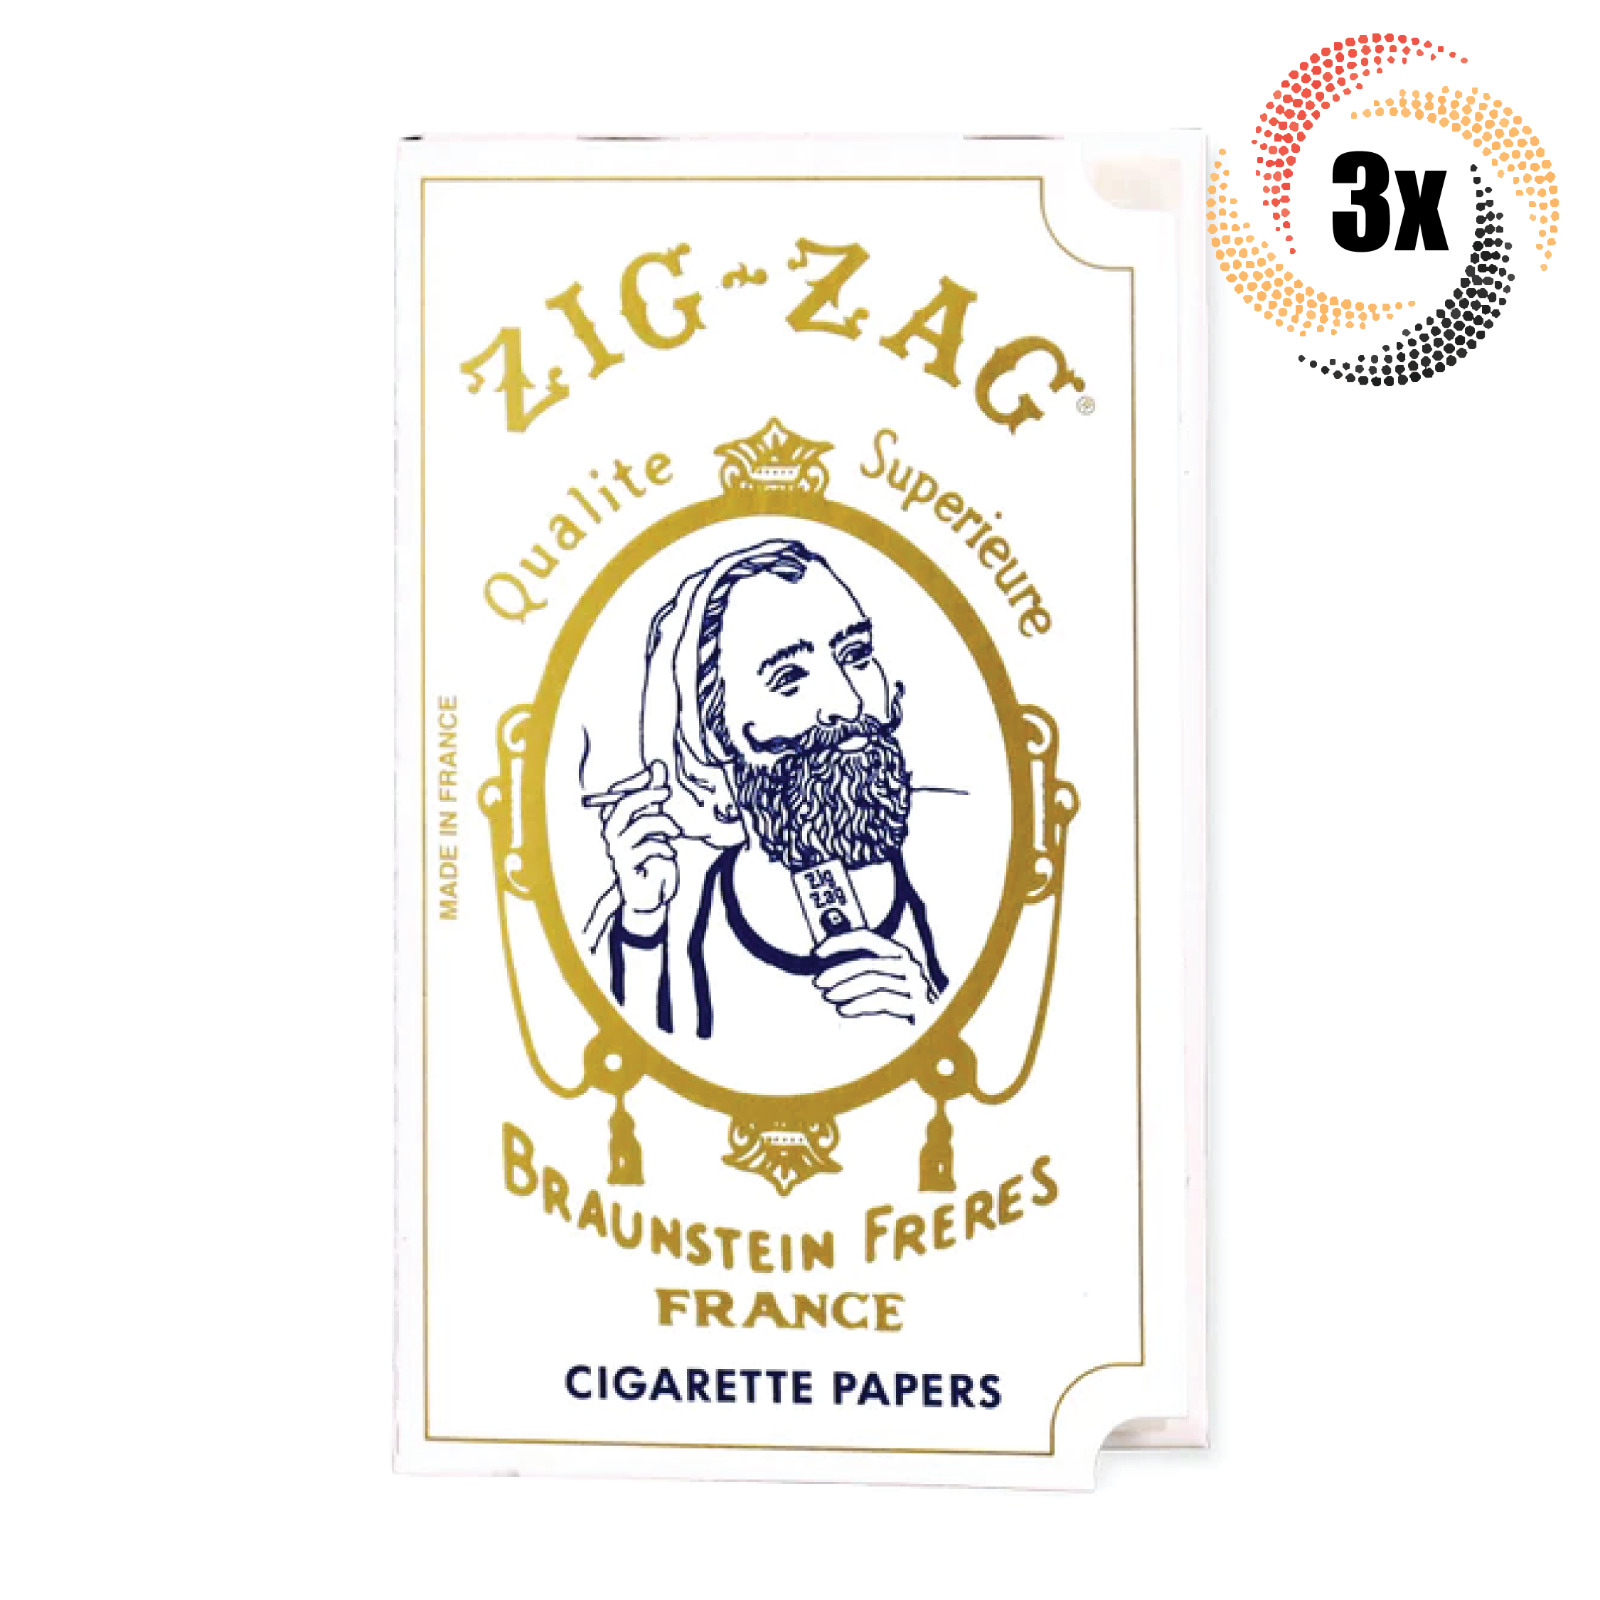 3x Packs Zig Zag White France Single Wide Rolling Papers | 32 Papers Each |